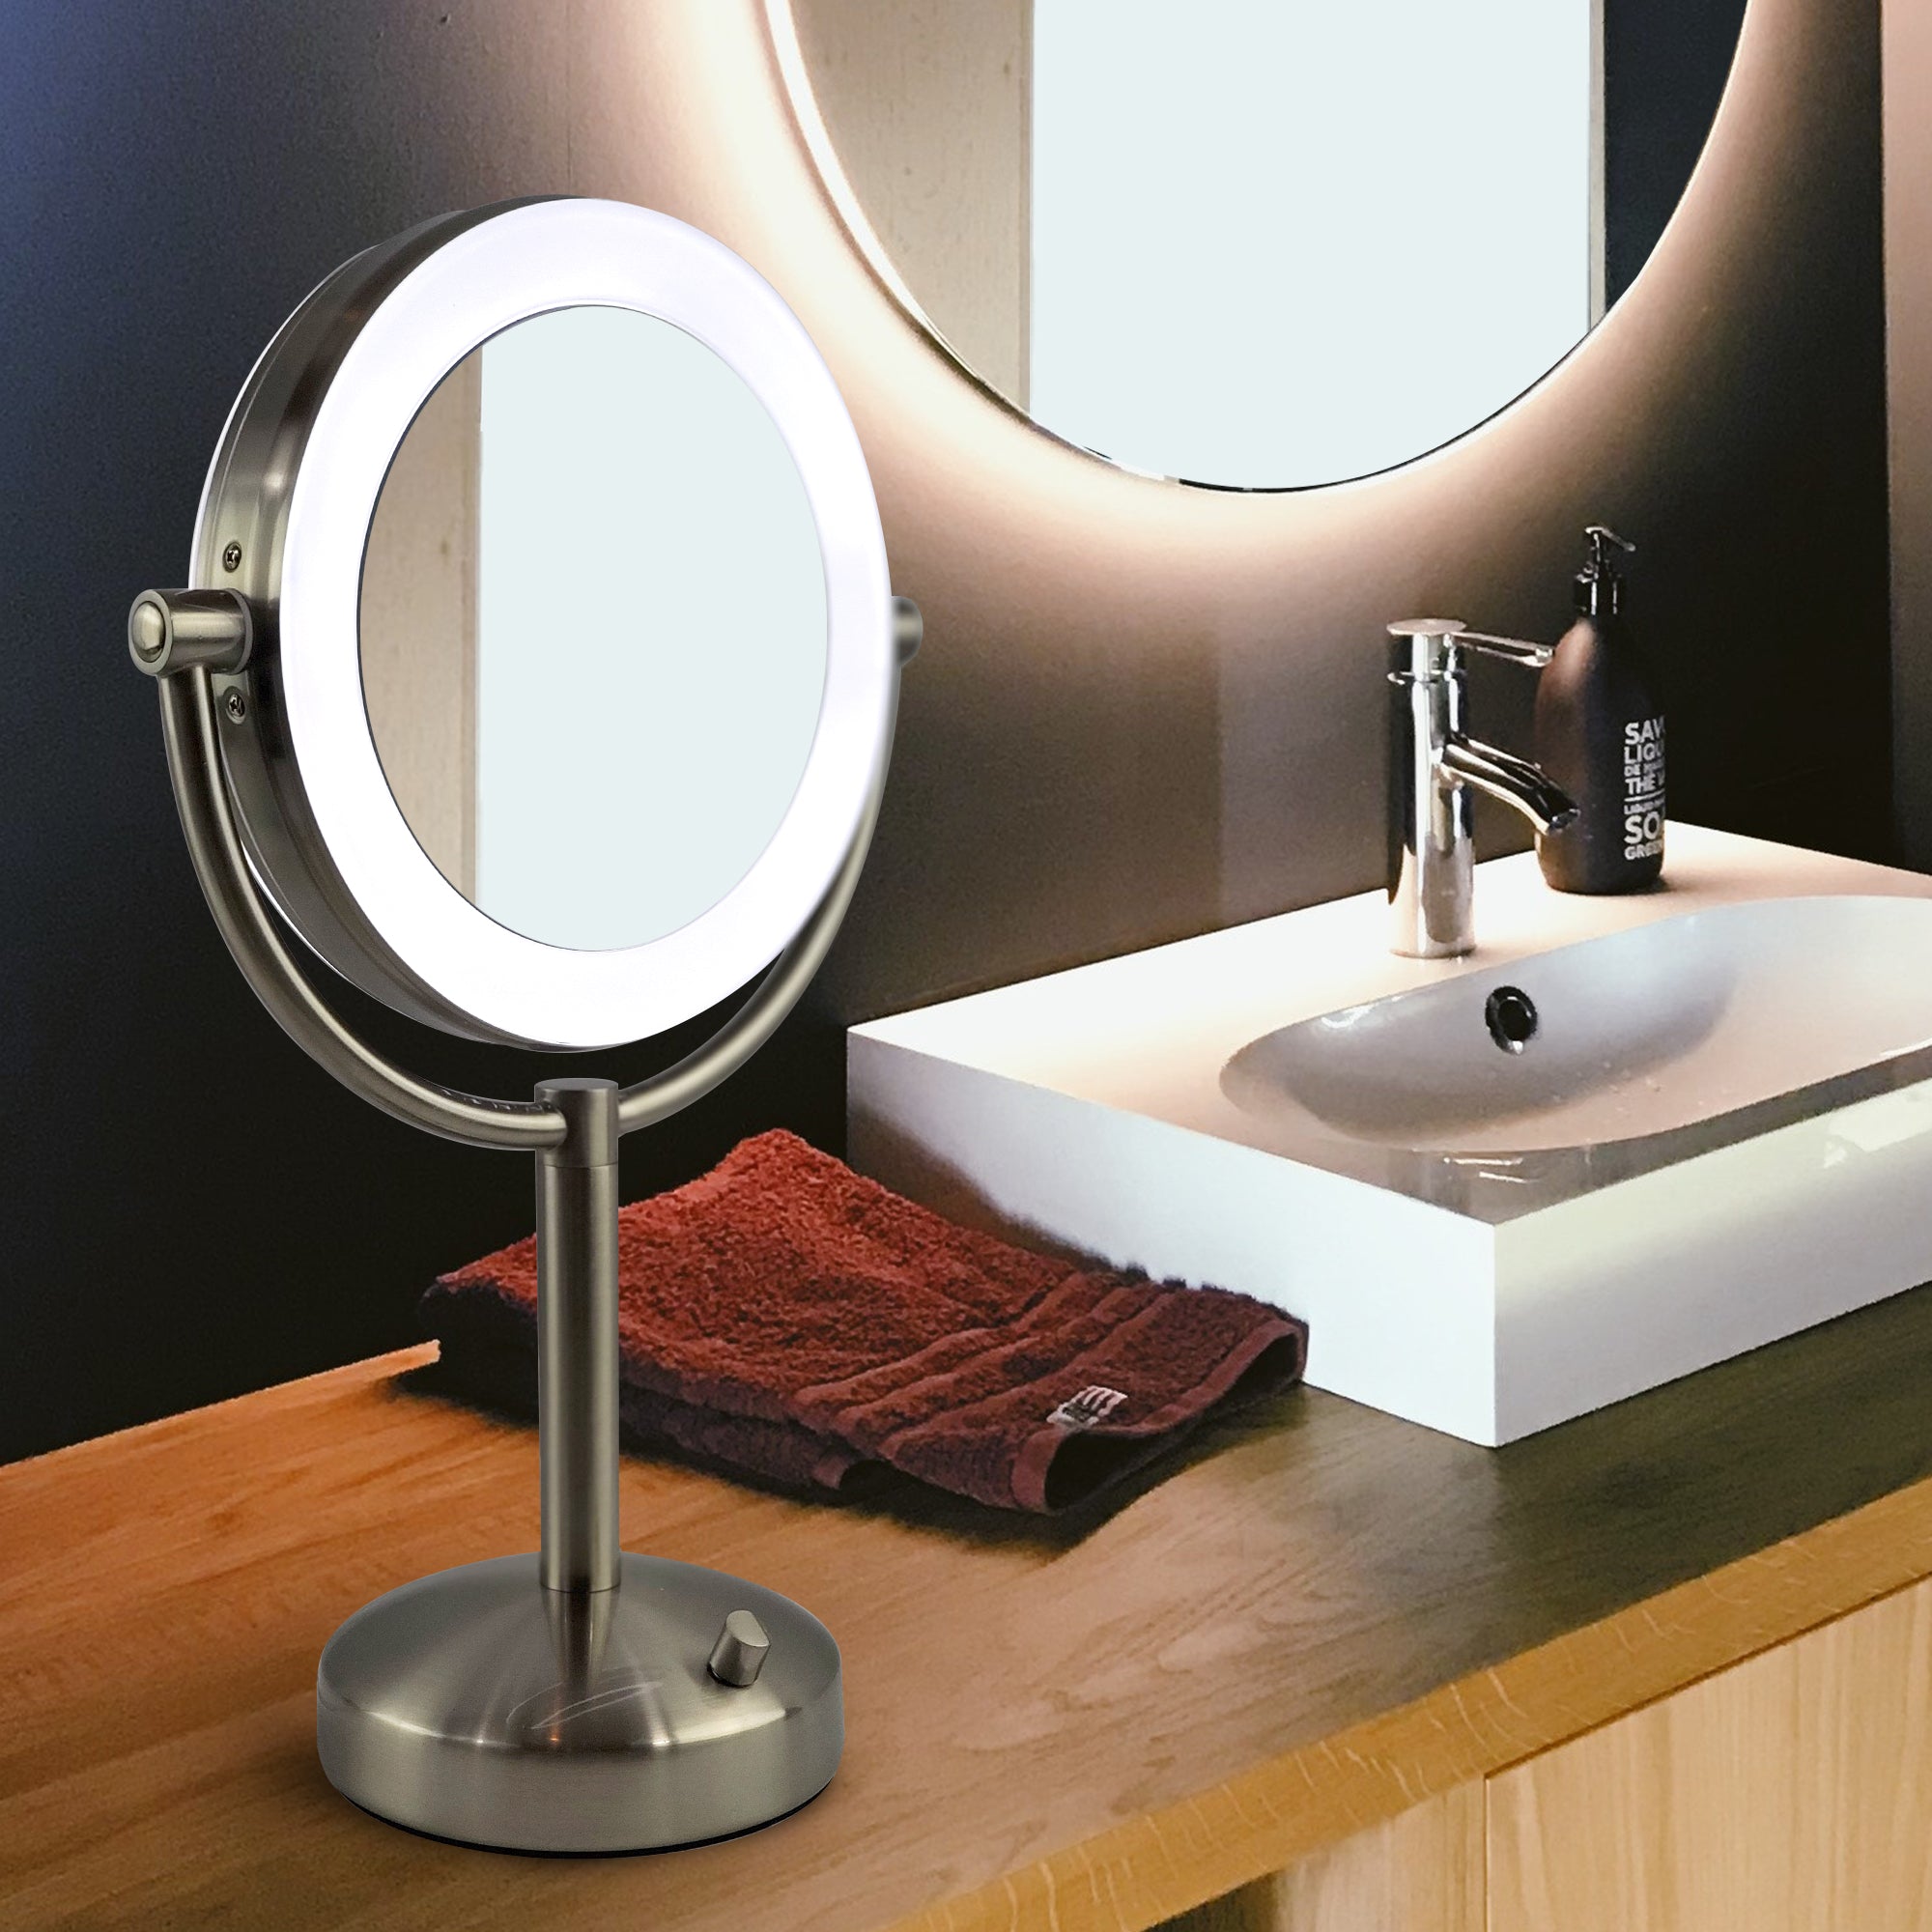 Best light up vanity mirrors 2021: For make-up and magnification